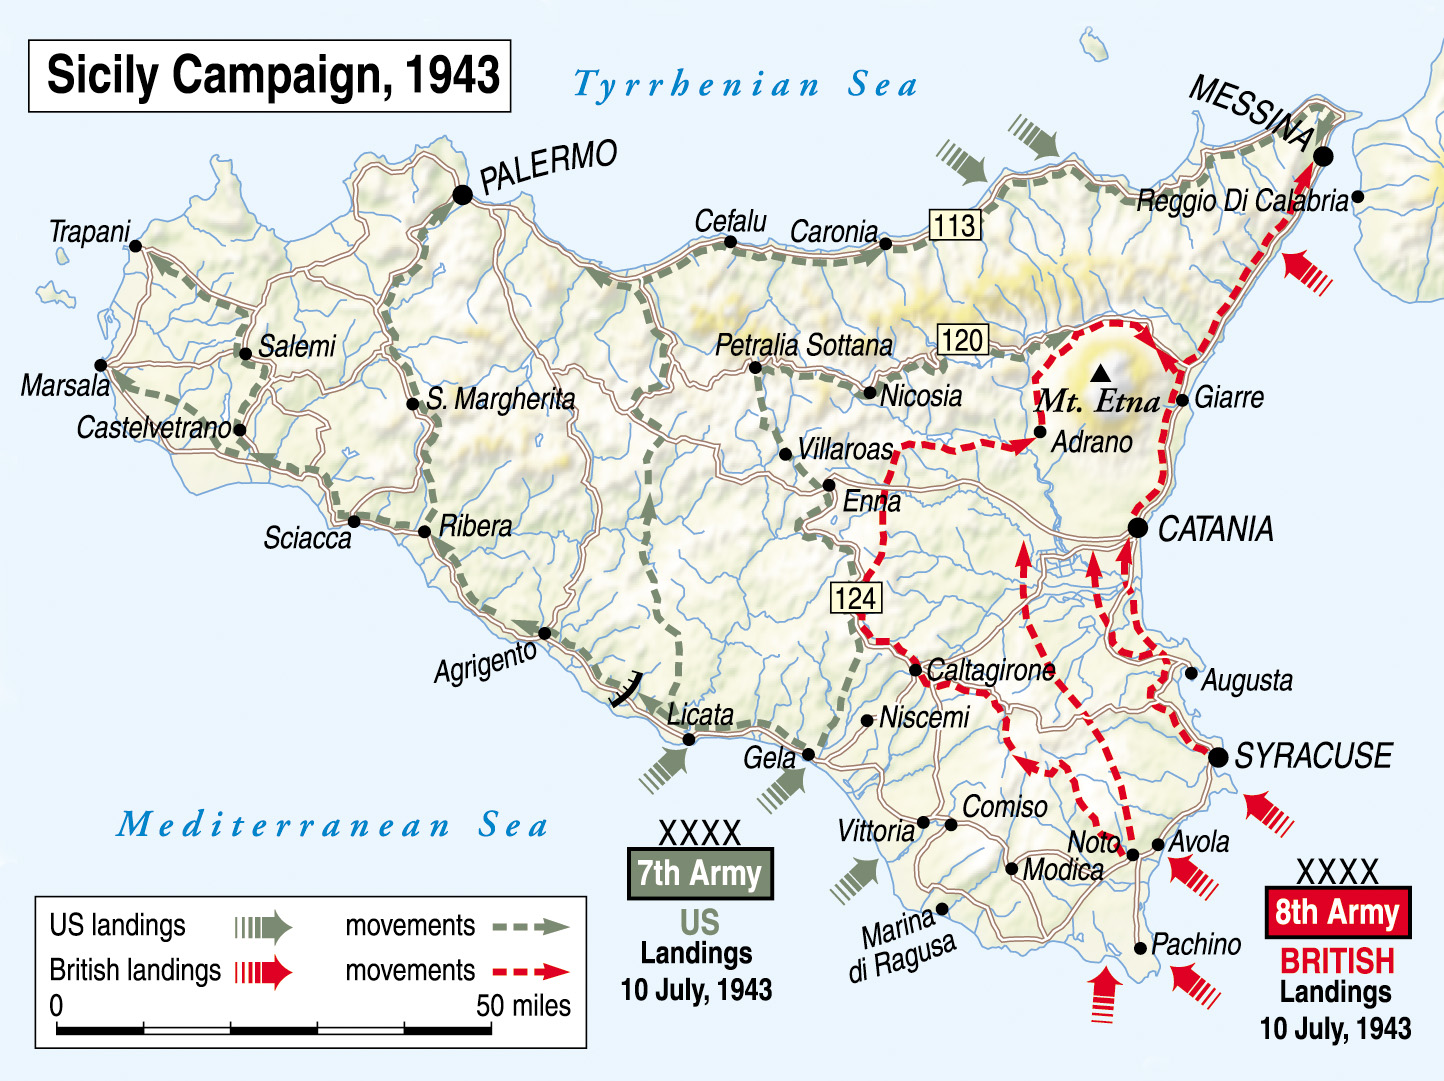 Operation Husky had British and American forces landing on the southern and eastern coasts of Sicily. After initial progress, Allied forces found themselves bogged down against heavy German defenses around Messina.